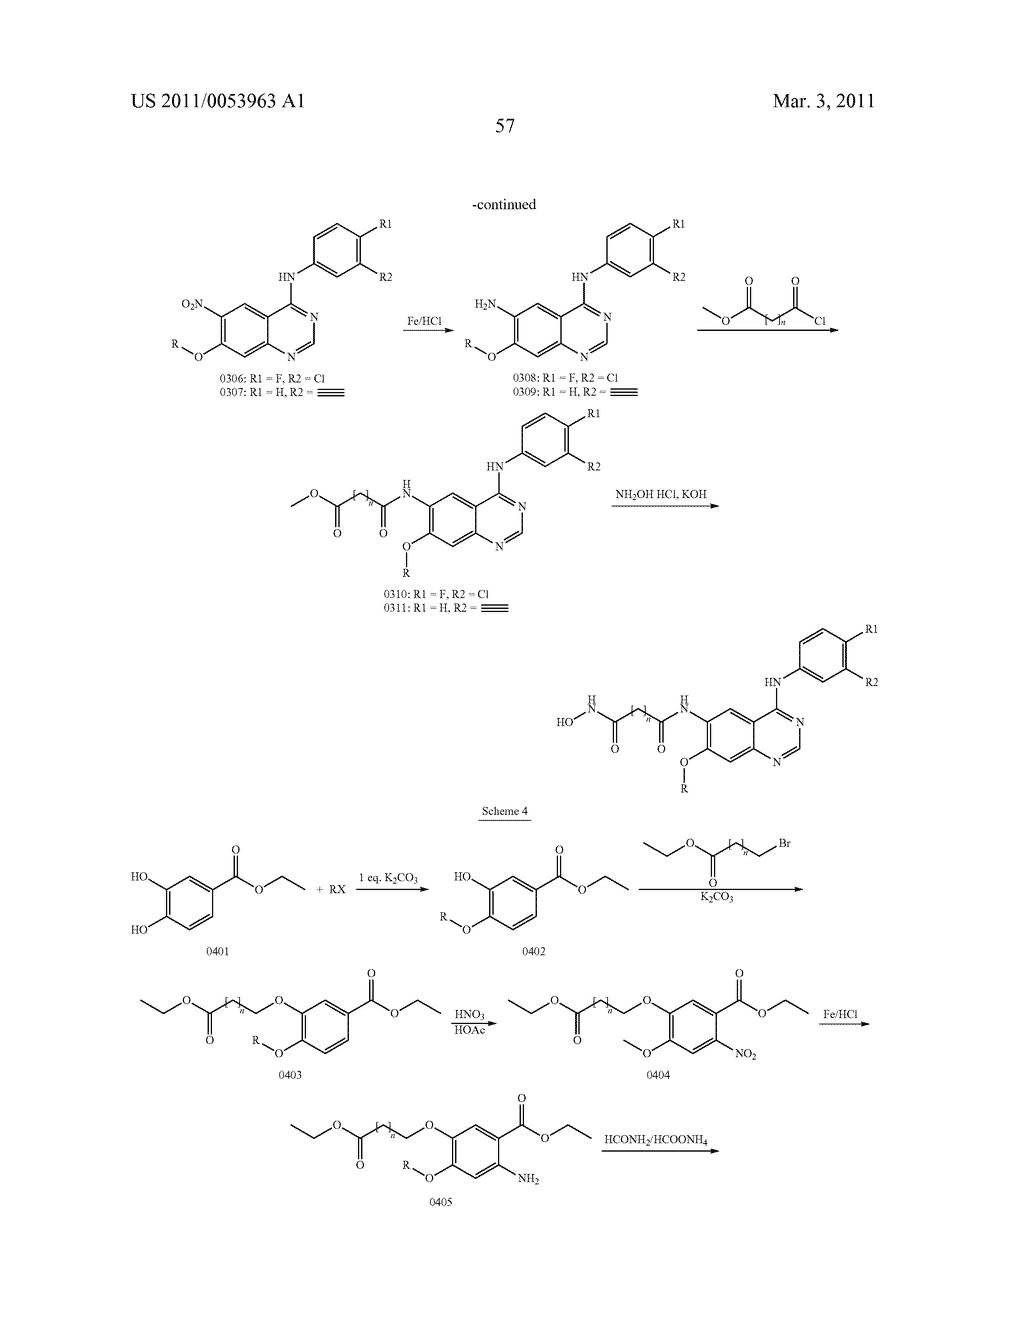 TARTRATE SALTS OF QUINAZOLINE BASED EGFR INHIBITORS CONTAINING A ZINC BINDING MOIETY - diagram, schematic, and image 78